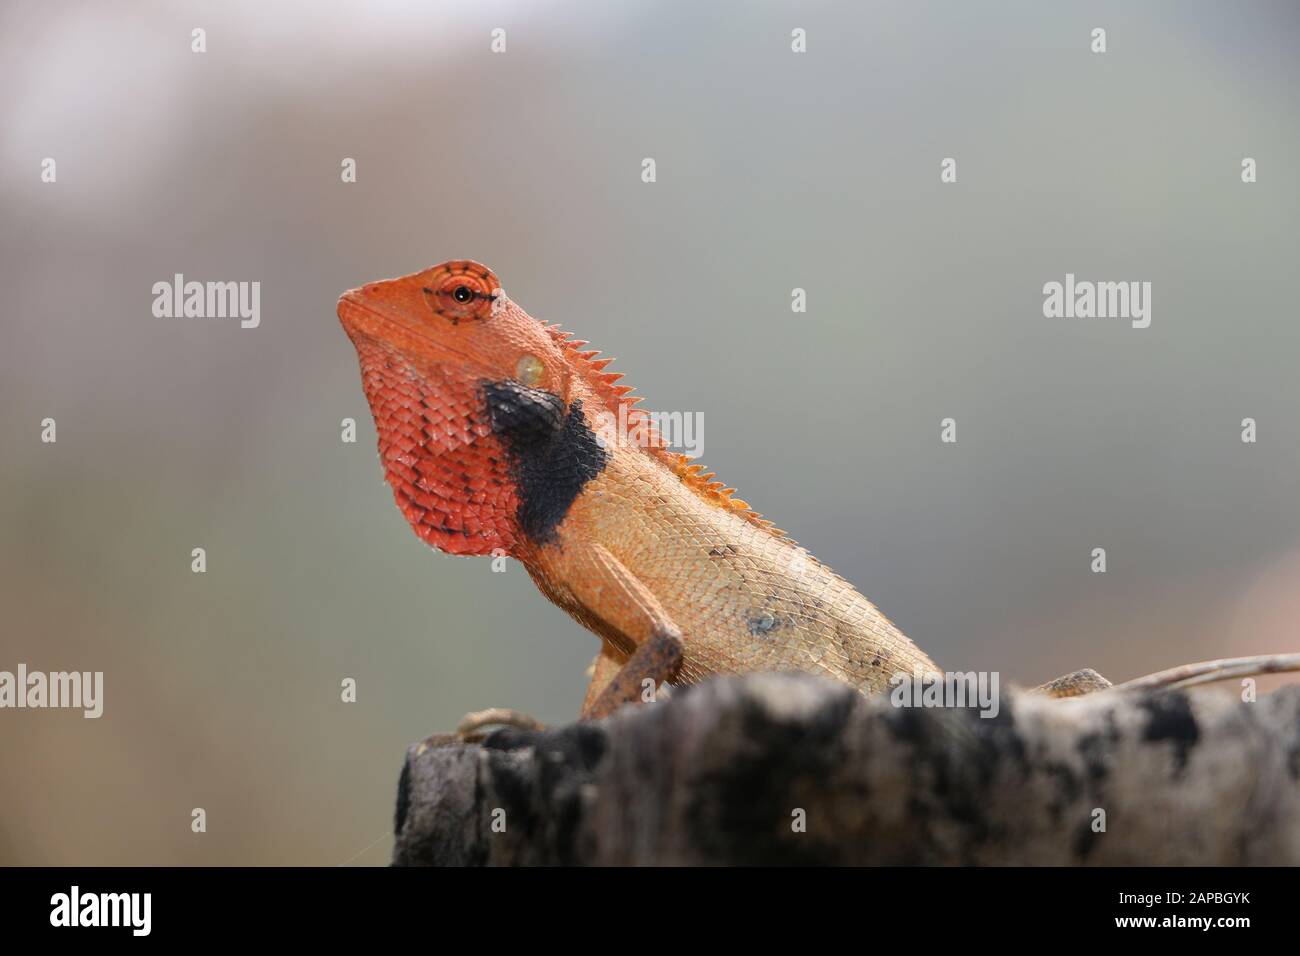 small lizard on a tree in Nepal Stock Photo